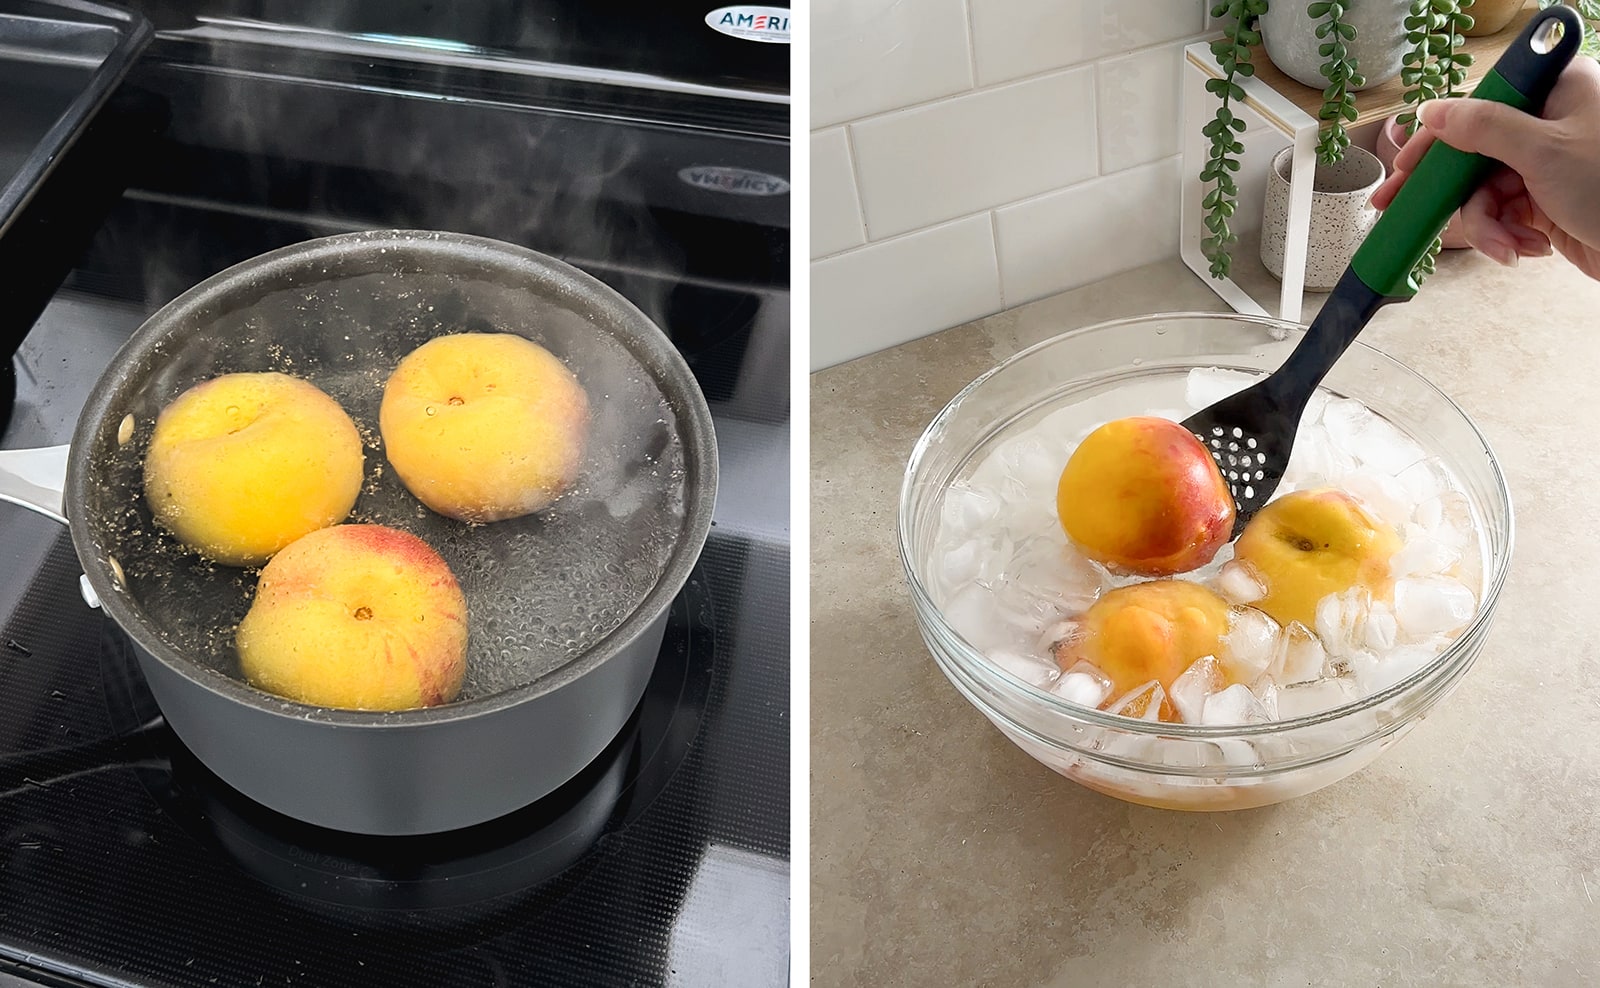 Left to right: three peaches in a pot of boiling water, lowering a peach into a bowl of ice water.